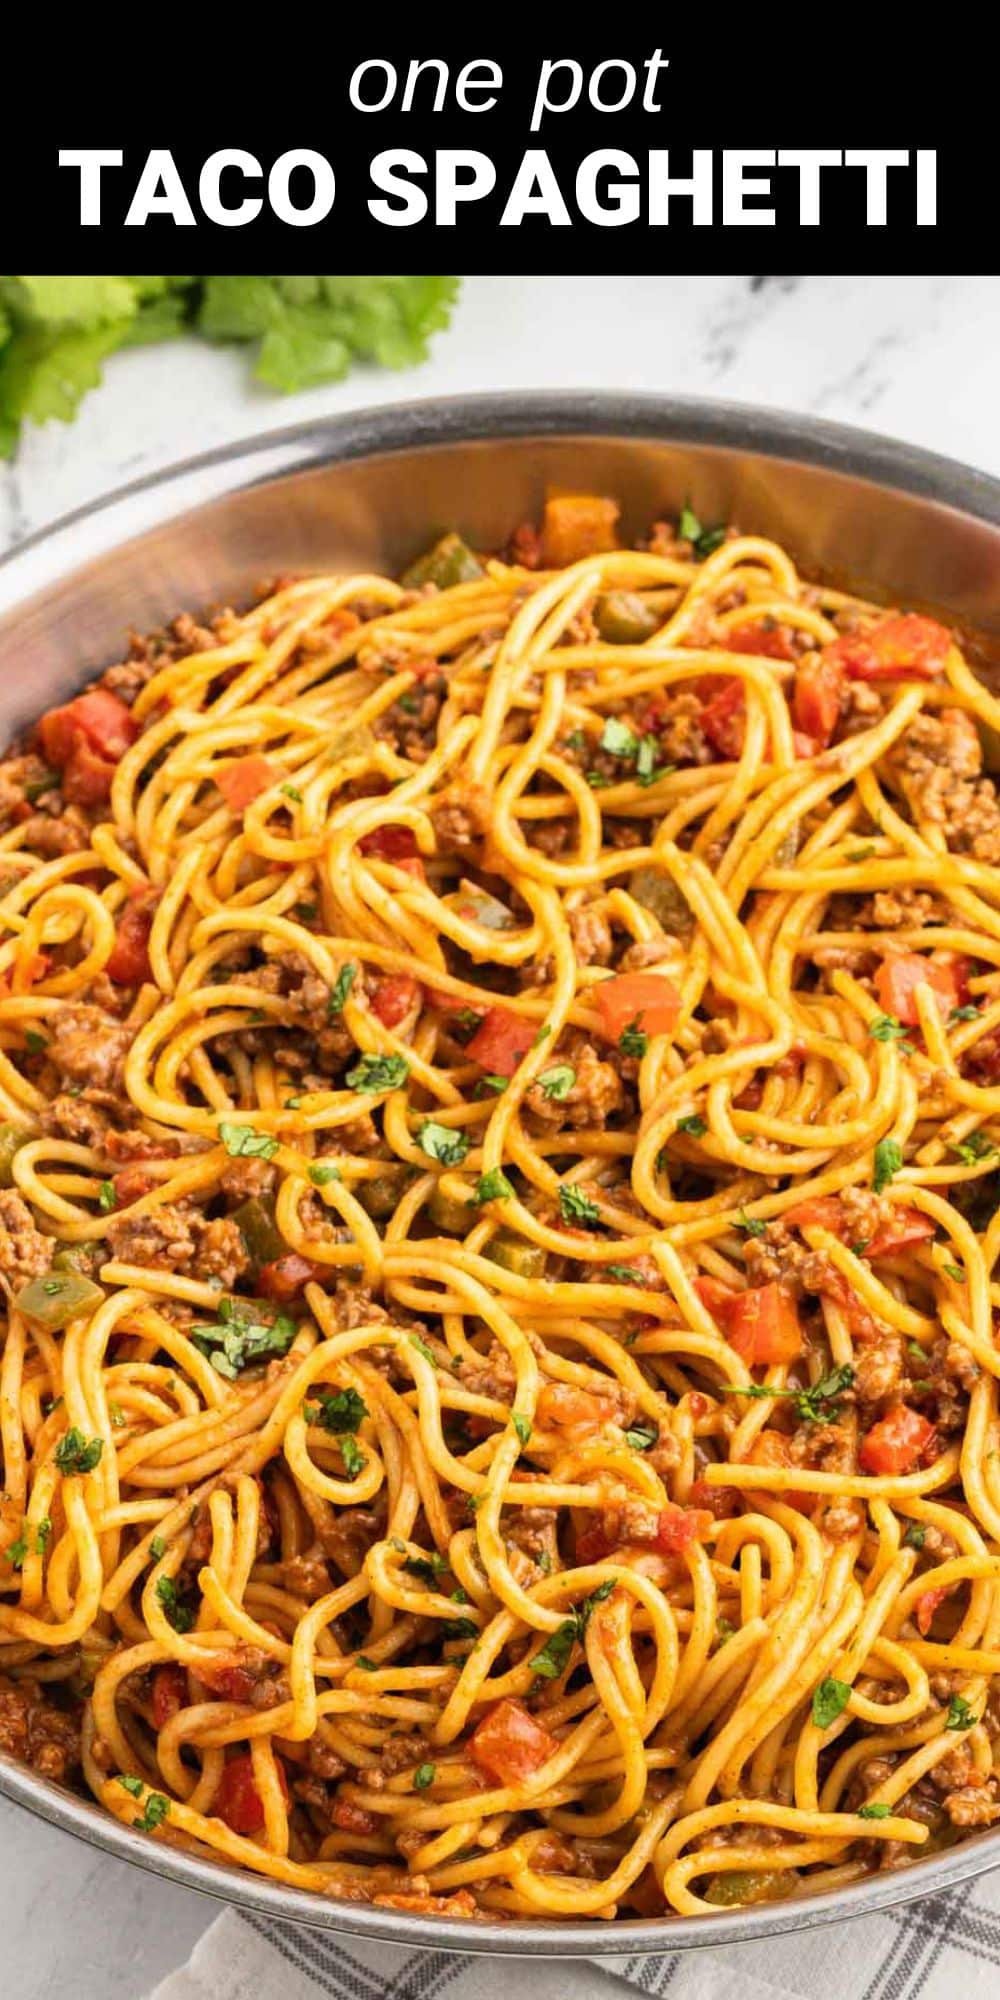 This easy Taco Spaghetti is a mouth-watering one-pot meal that's both Tex-Mex and Italian-inspired. It's a delicious and hearty 30-minute dish you can make without having to mess up every pot in the kitchen.